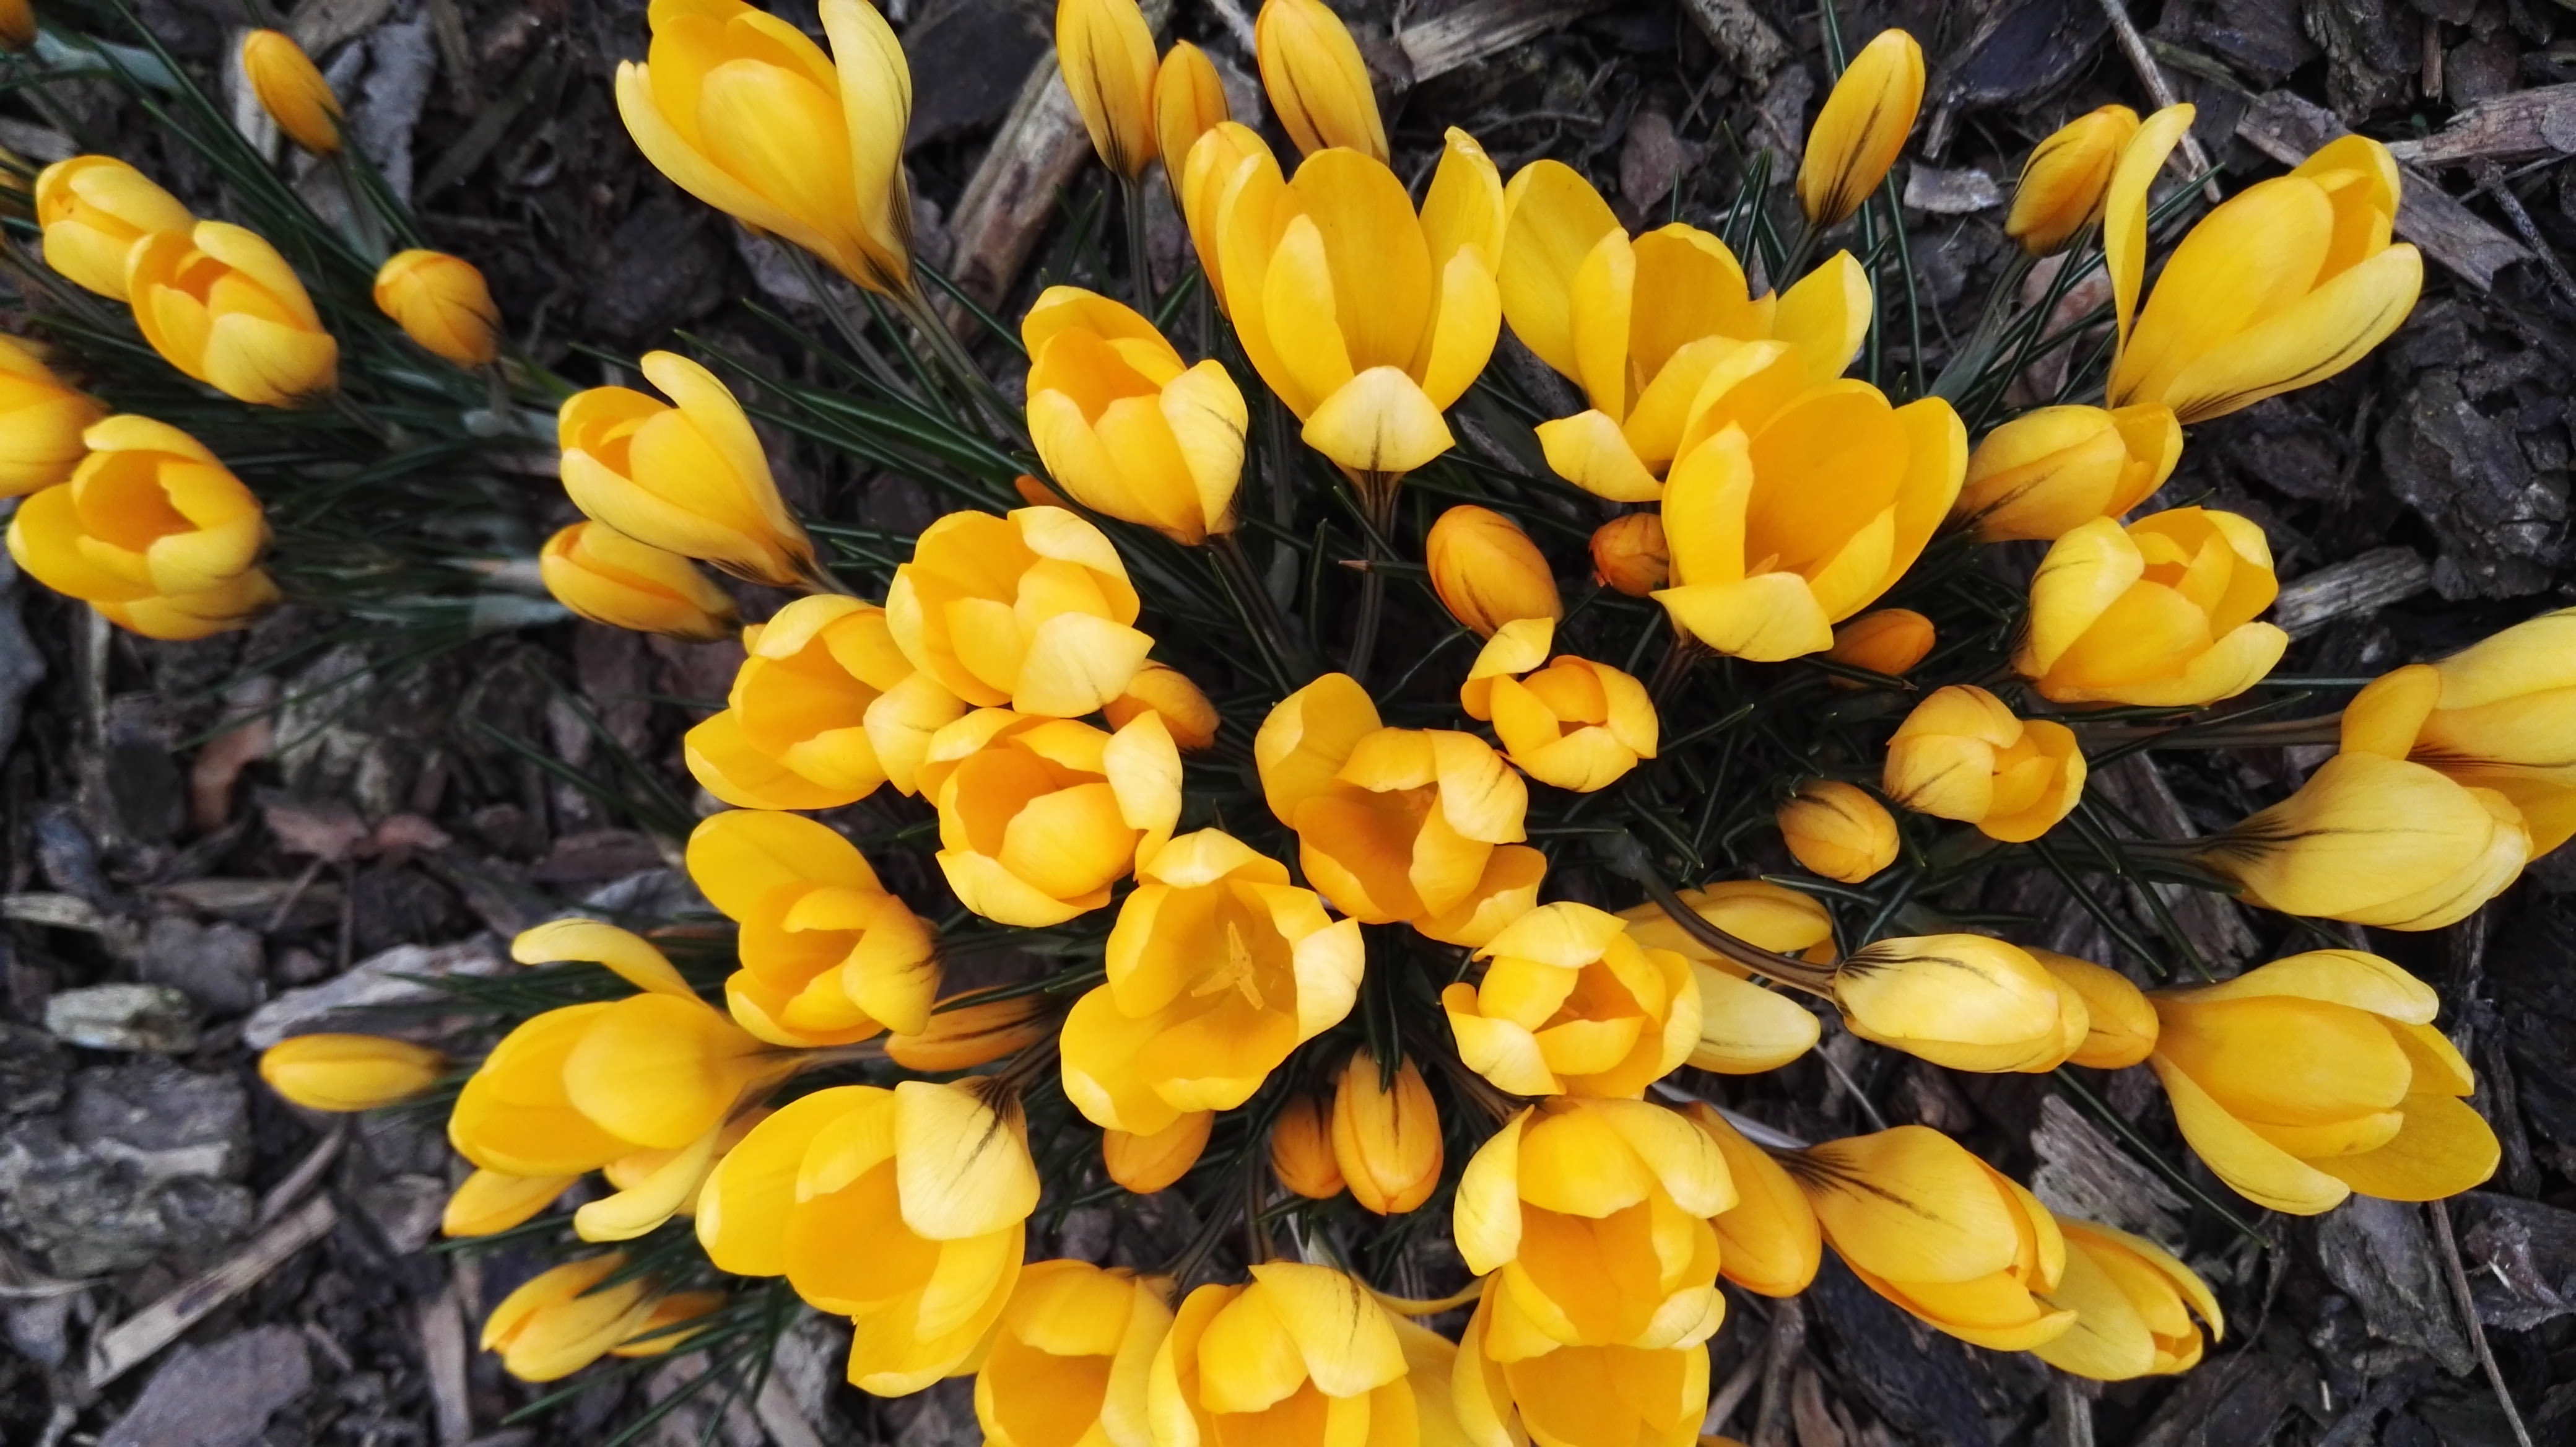 Yellow Flowers grouped together image - Free stock photo - Public ...